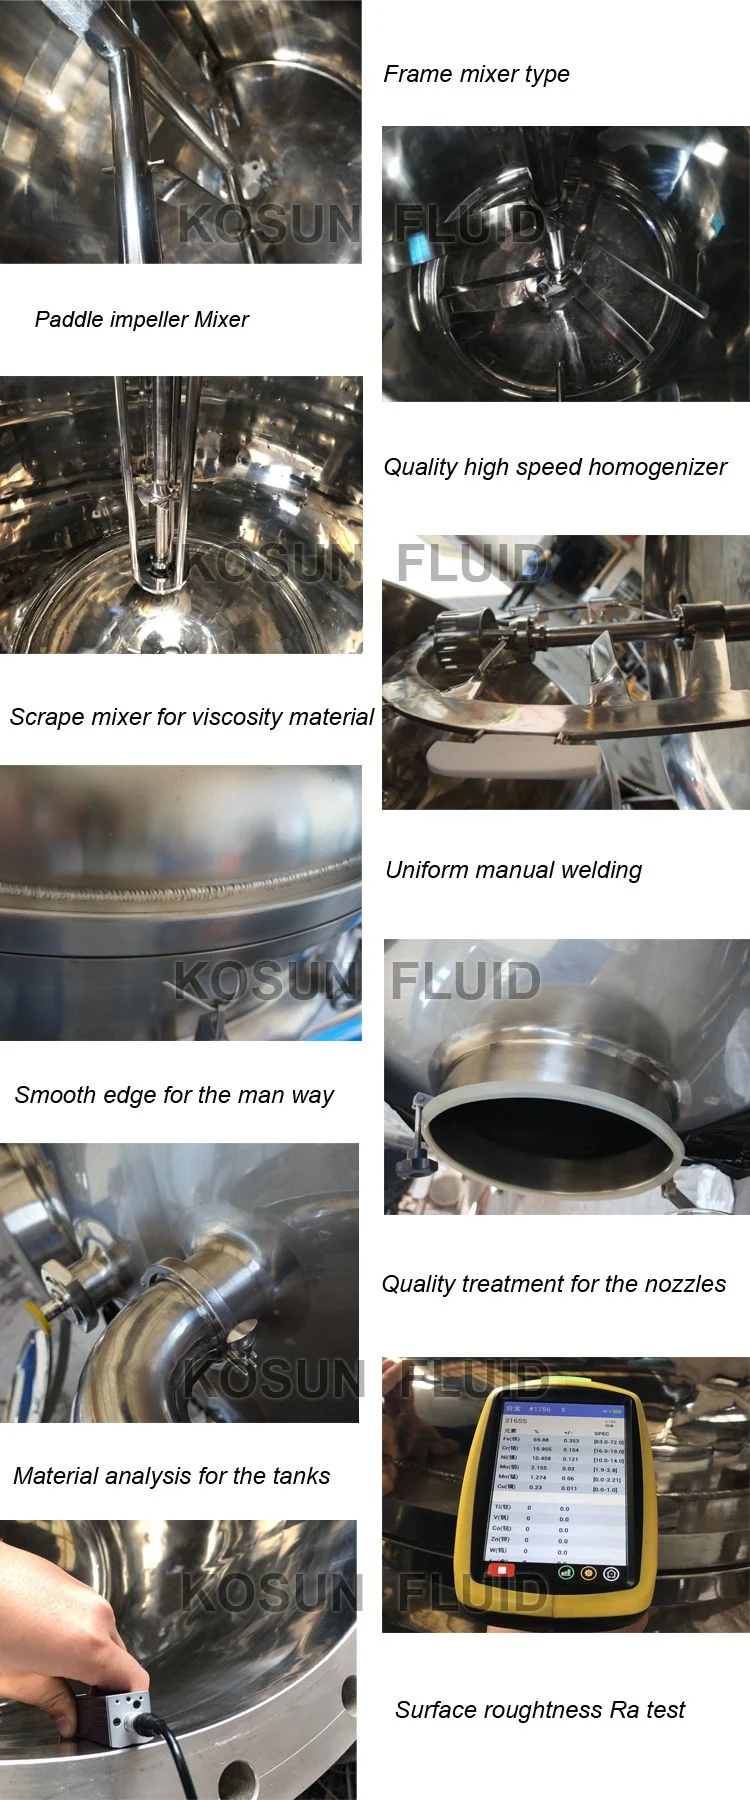 Food Grade Stainless Steel 300 1000 Liter Industrial Electric Steam Oil Cooking Jacket Kettle / Cooker / Pot